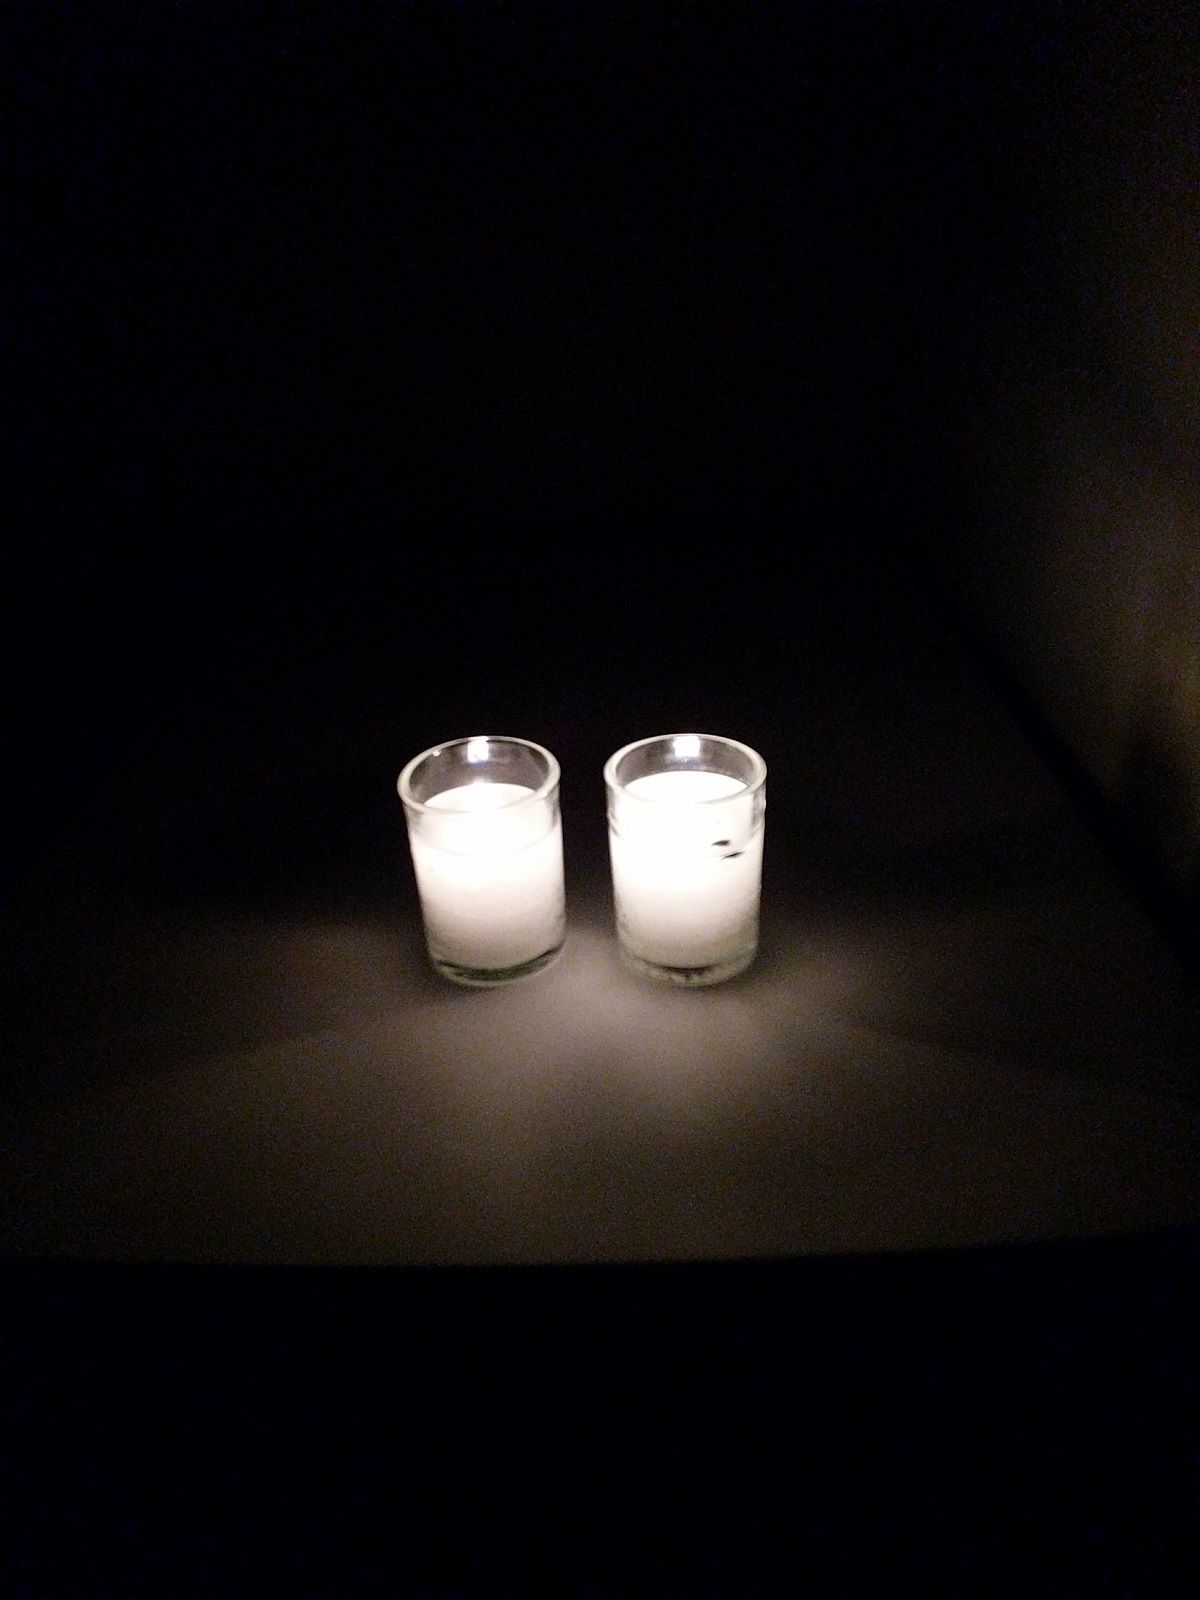 Image of two lit yahrzeit candles sitting in the darkness.